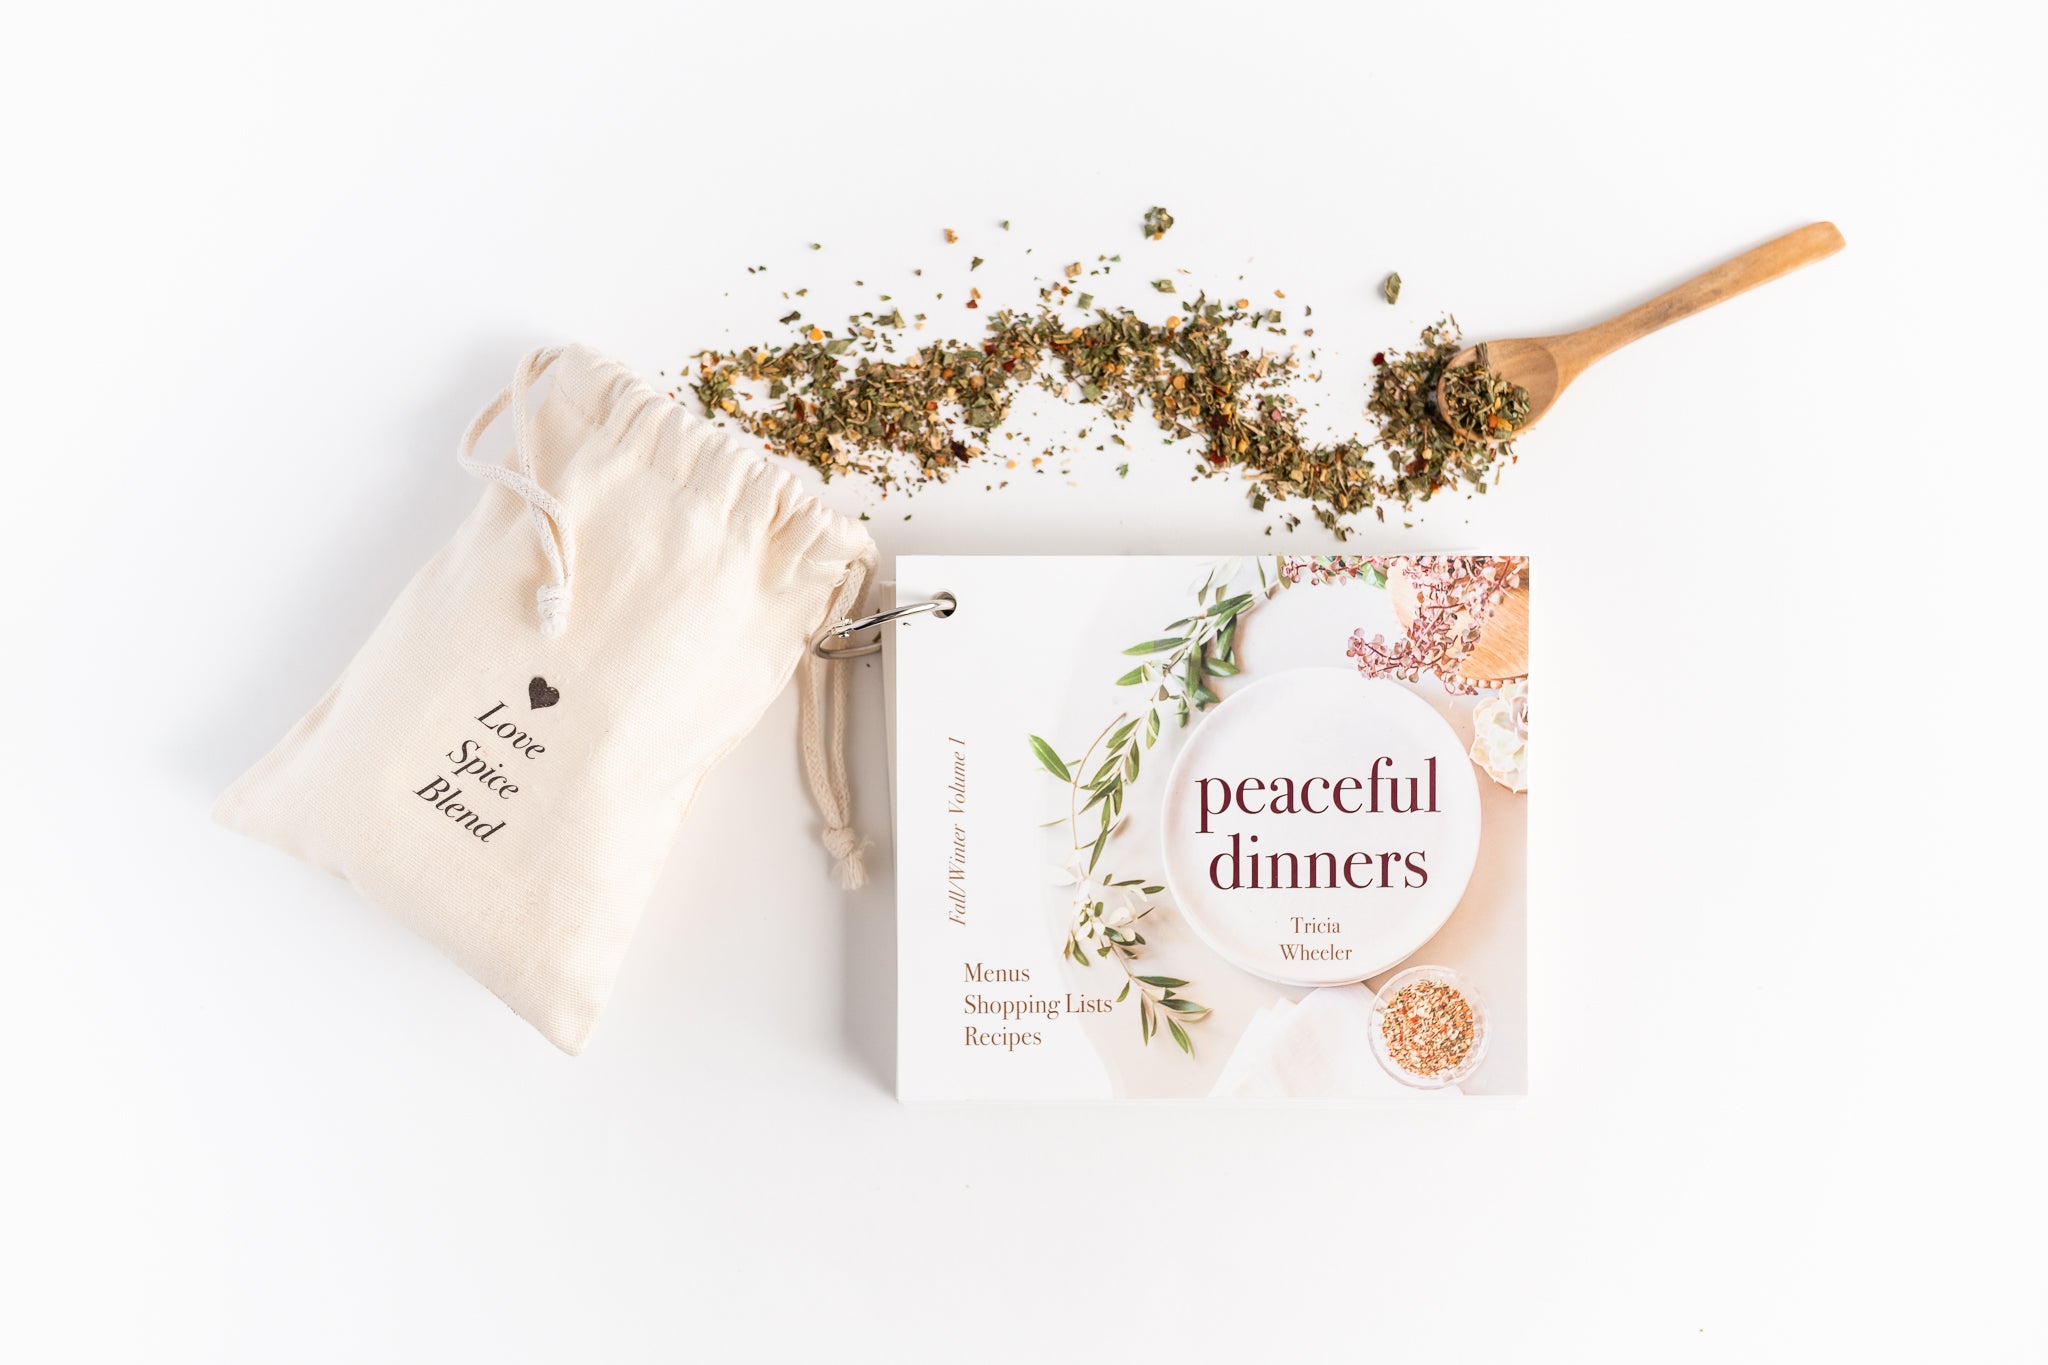 The Peaceful Dinners System - A Collection of Menus, Shopping Lists, and Recipes + our Special Love Spice Blend